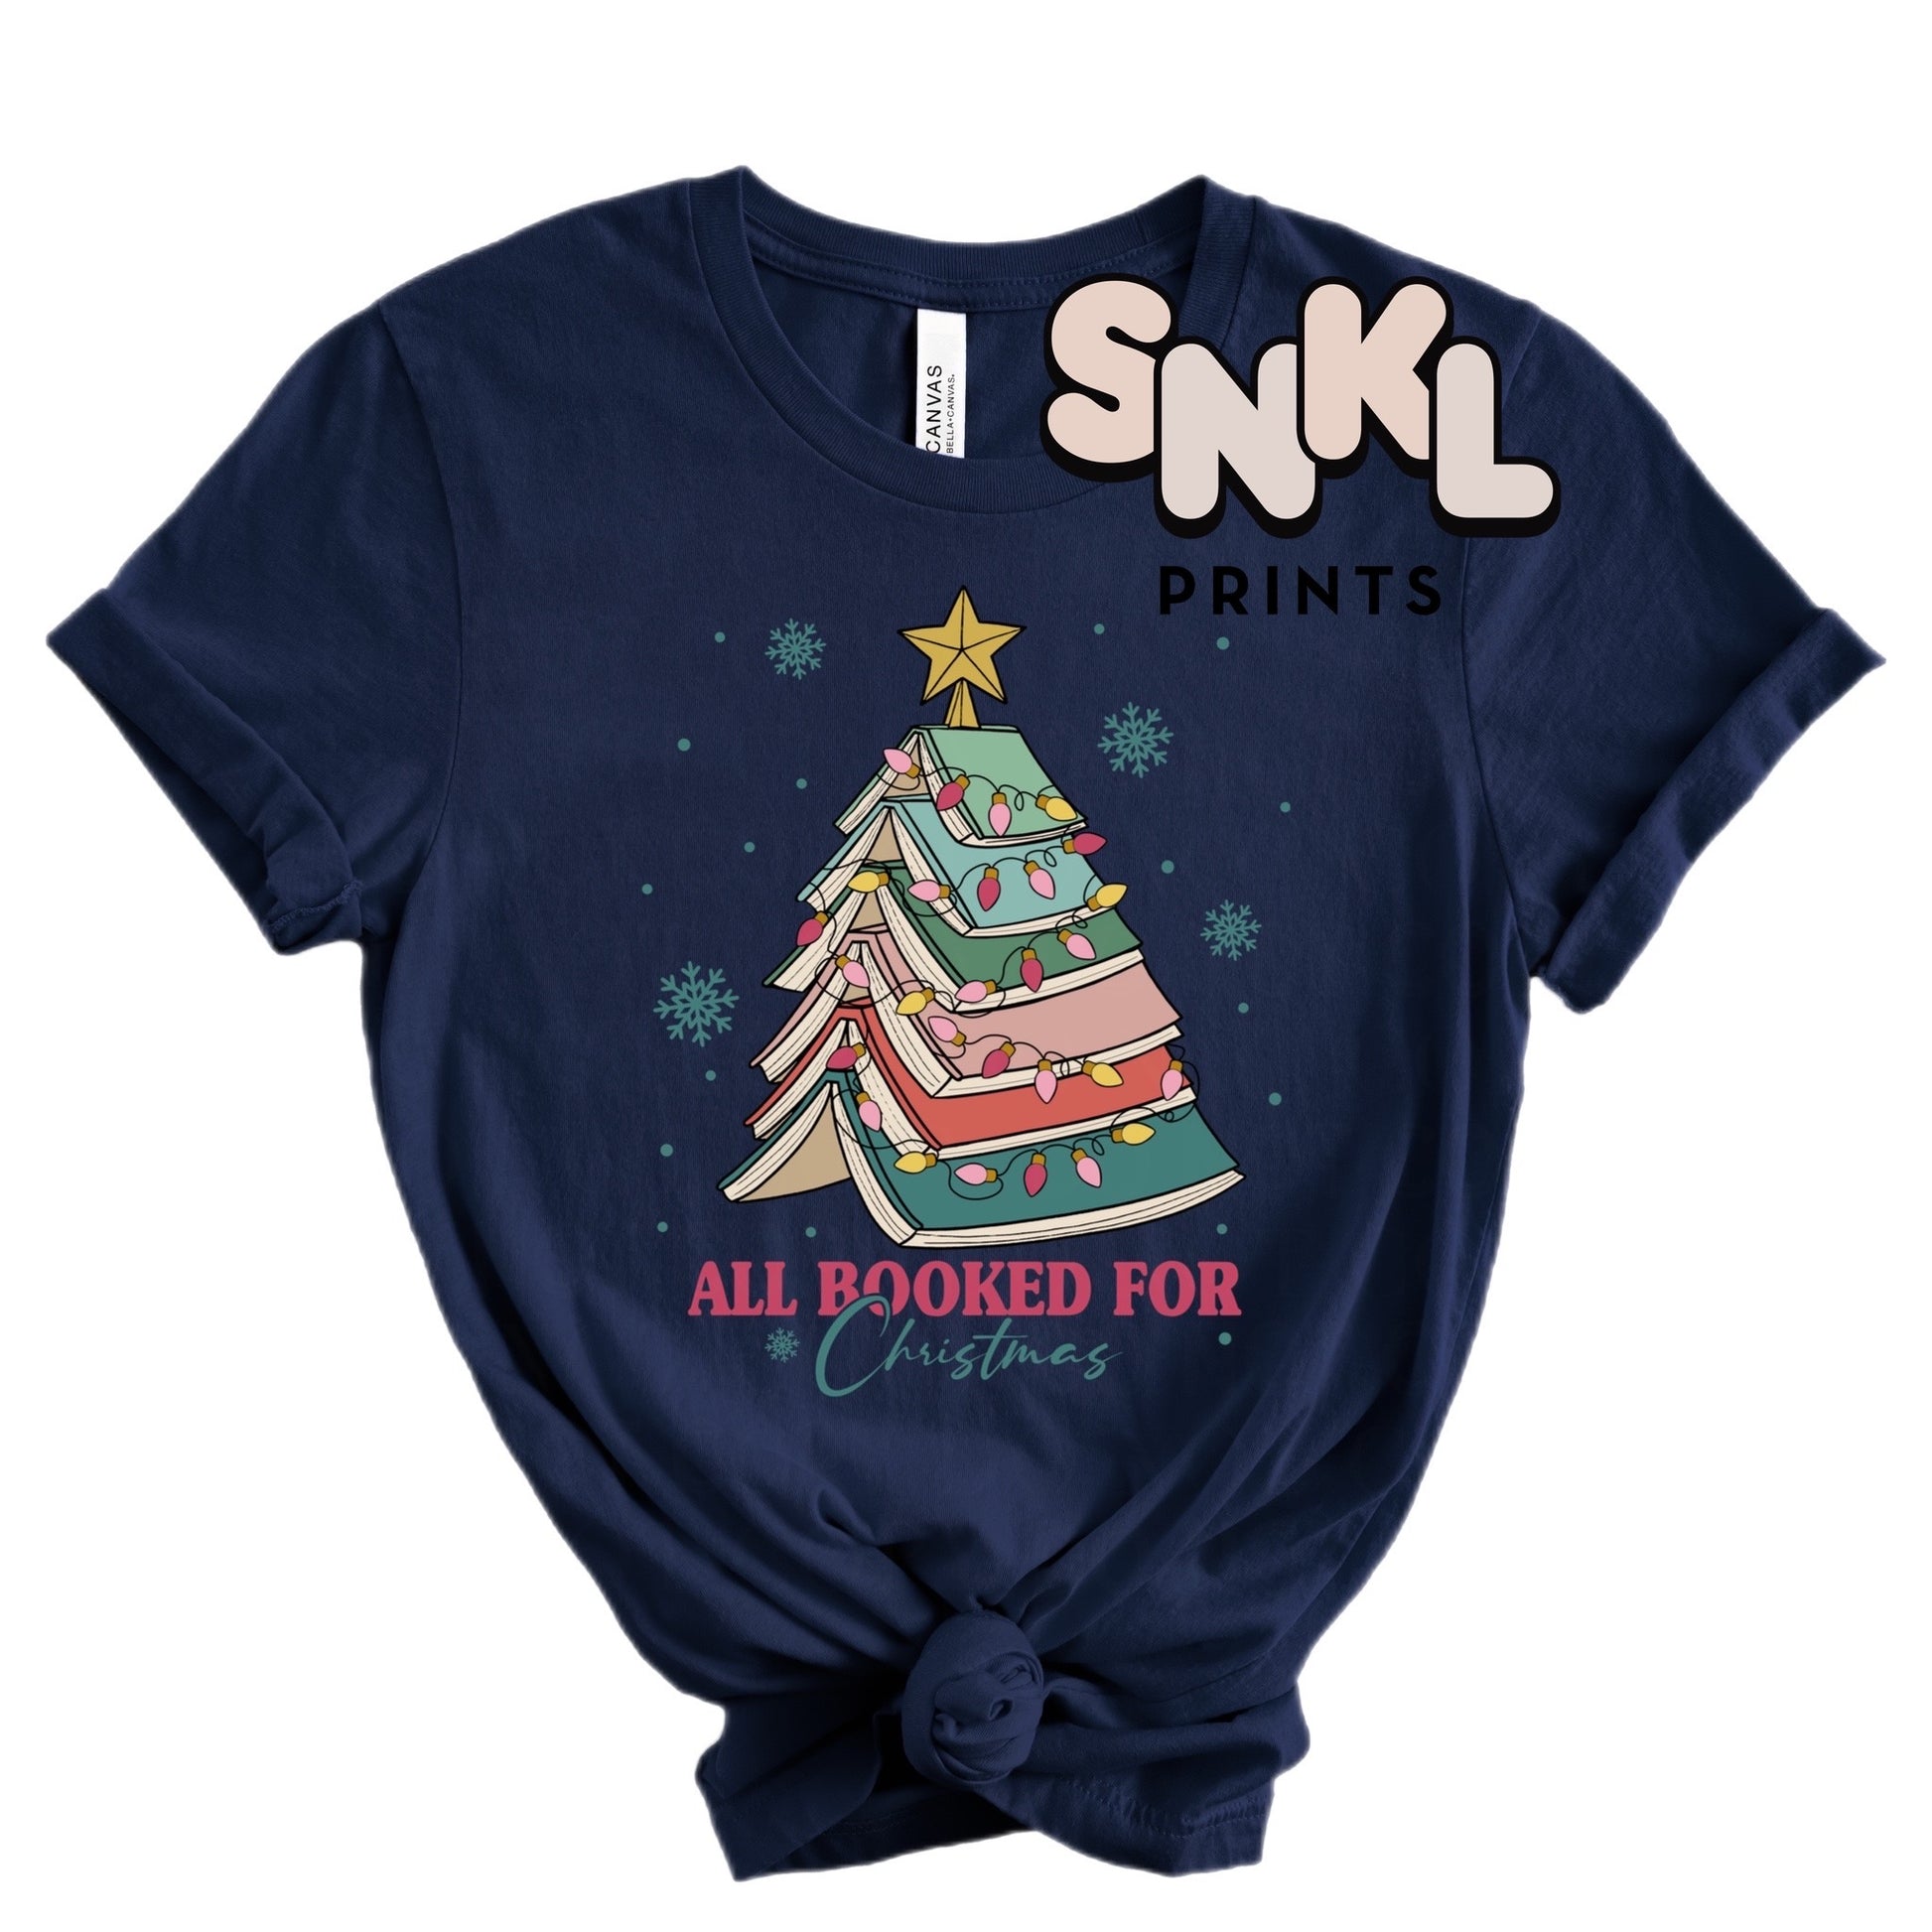 All Booked For Christmas | Adult - SNKL Prints